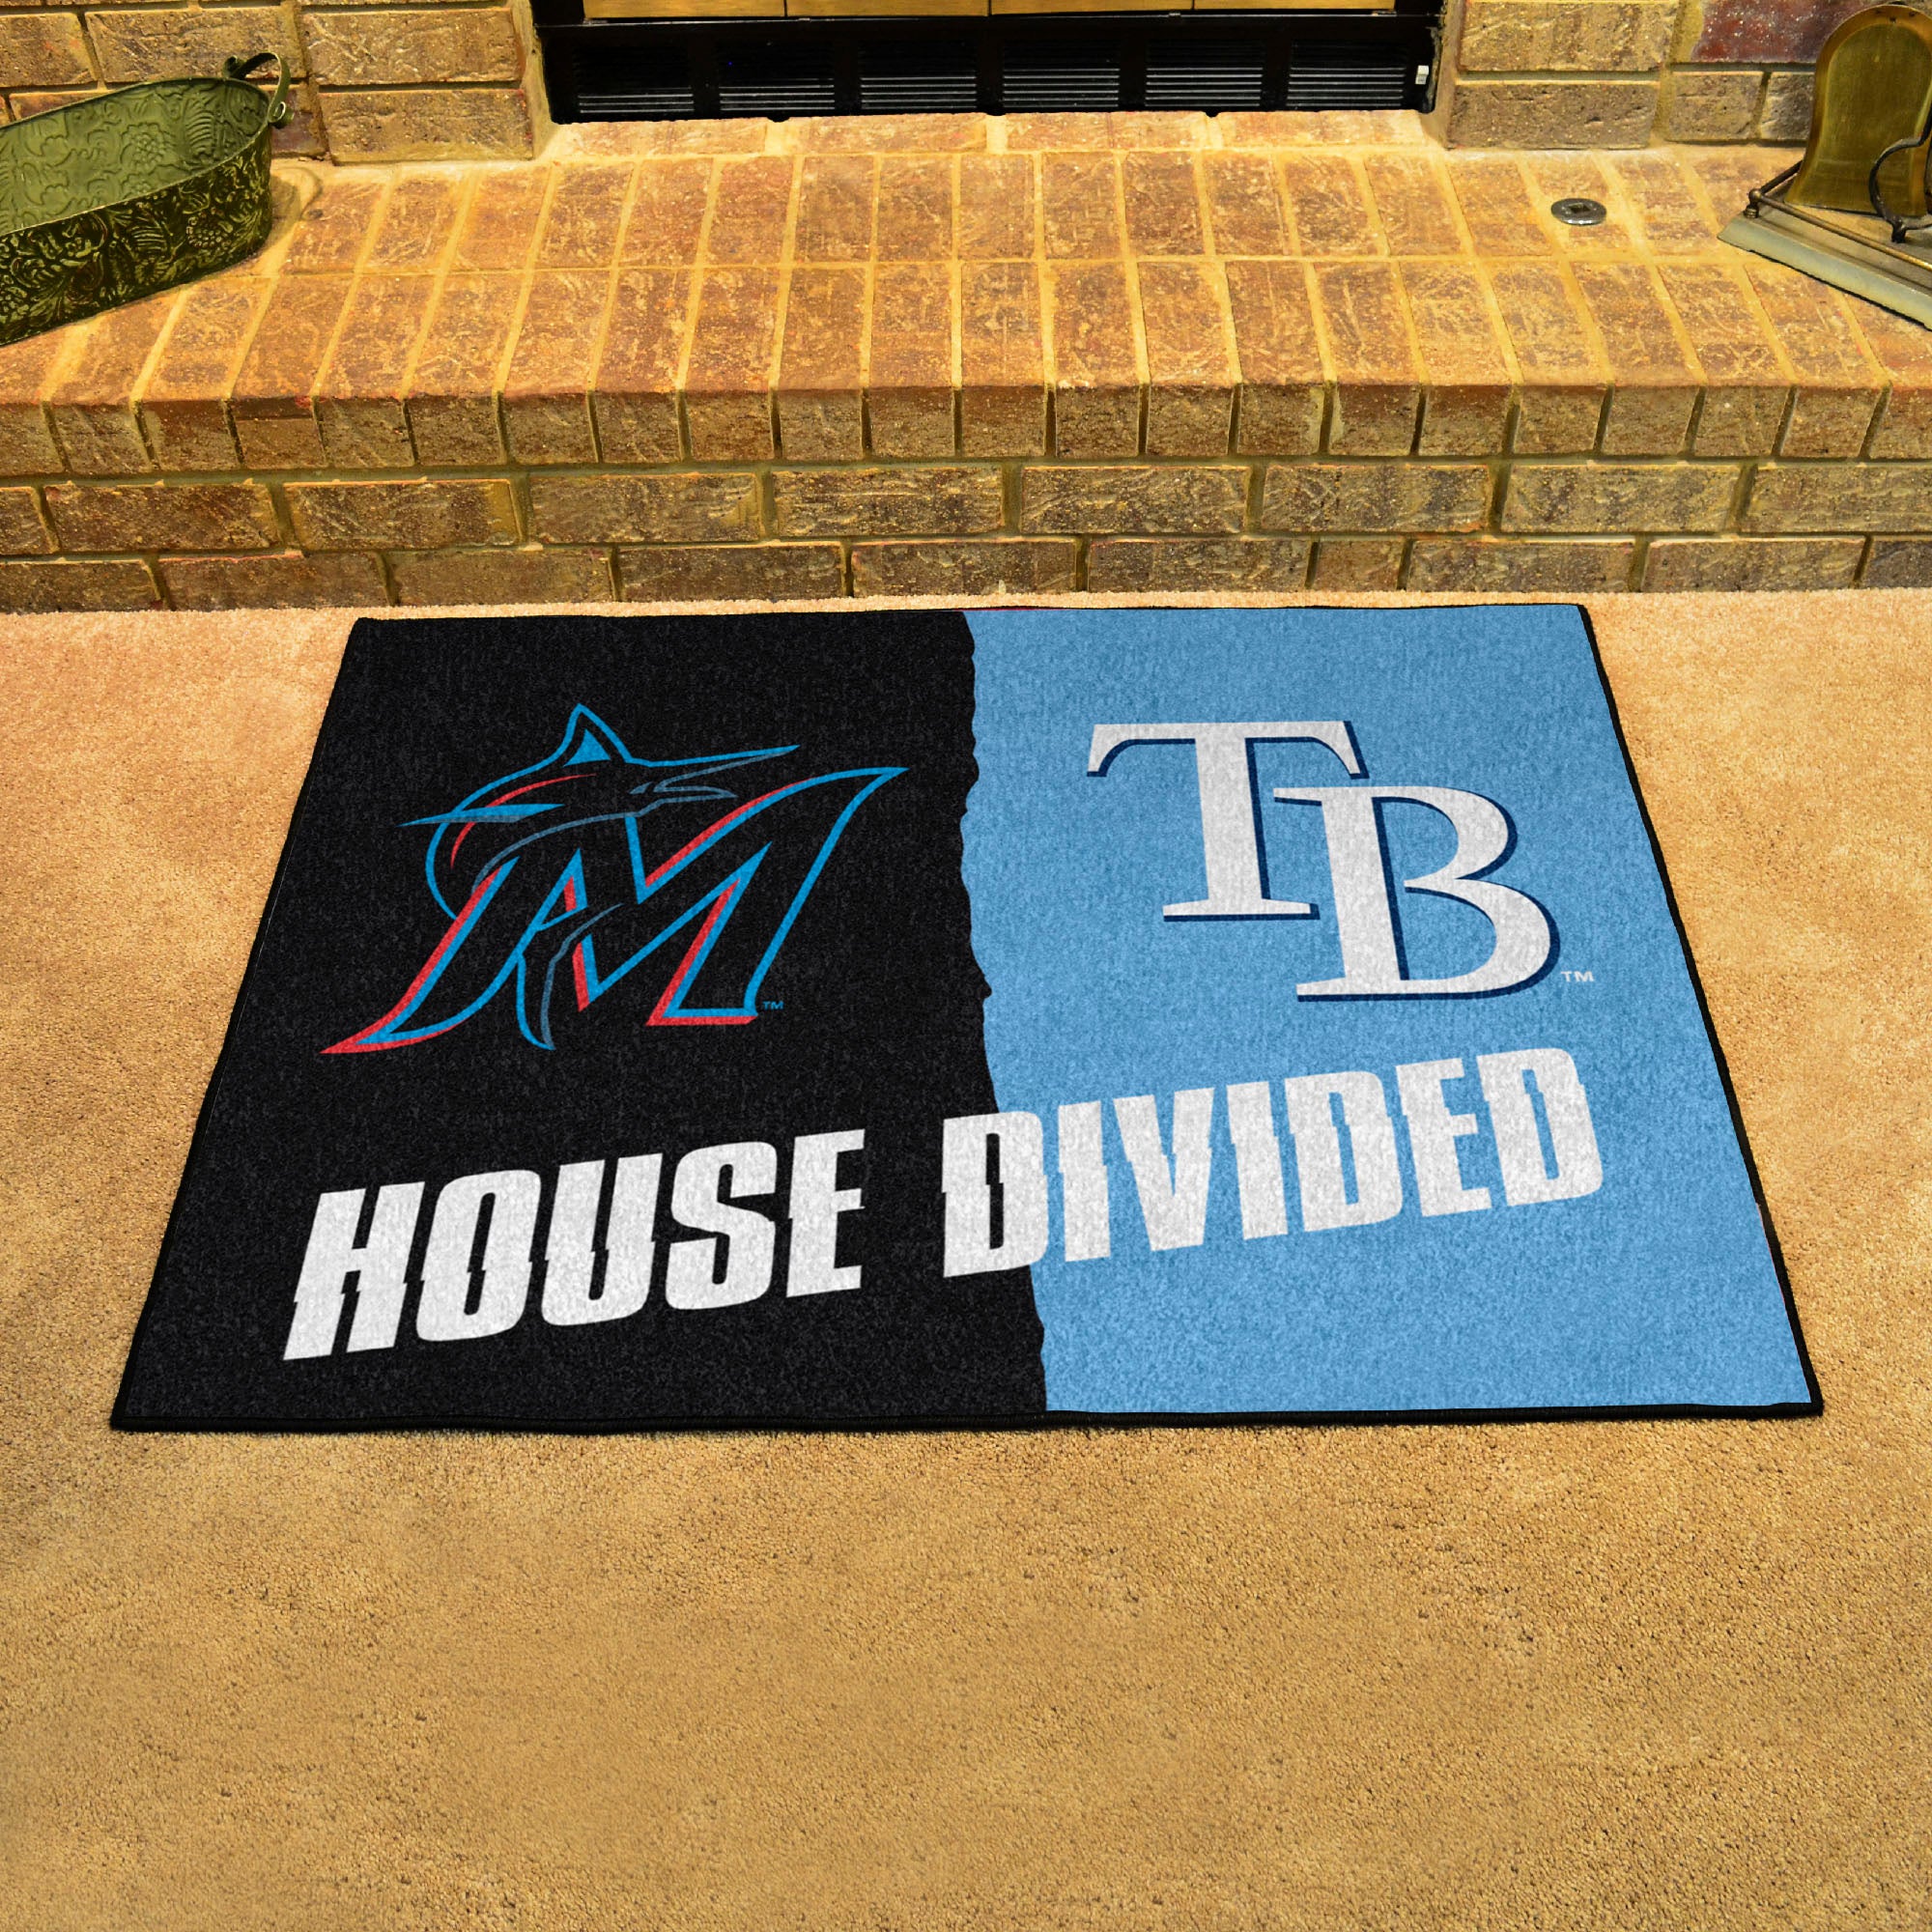 FANMATS, MLB House Divided - Marlins / Rays House Divided Rug